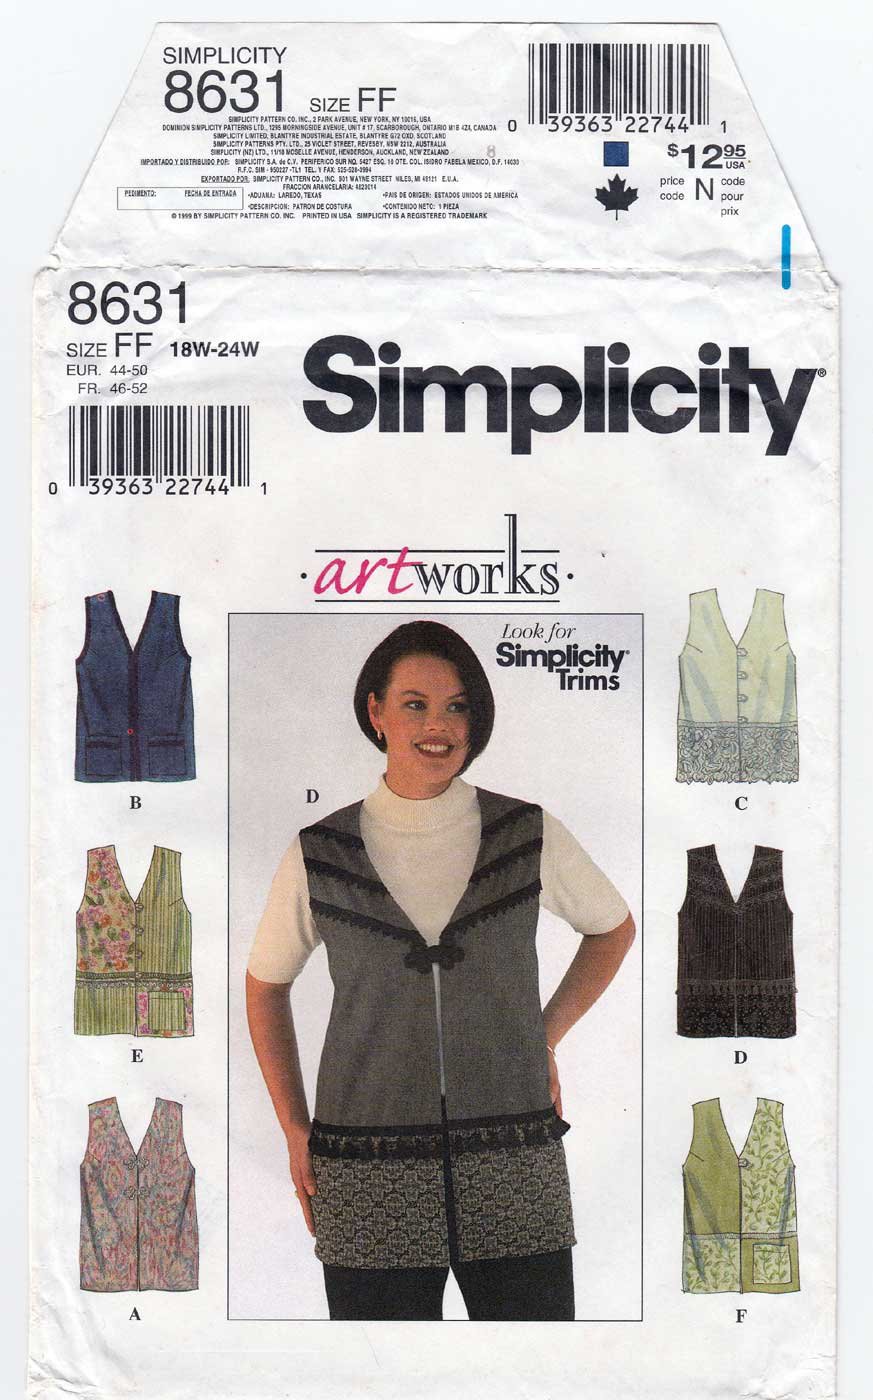 Simplicity 9630 Size A Easy to Sew Pattern 90s 3 View Vest Pattern Uncut 6-24 Women's Vest with Buttons